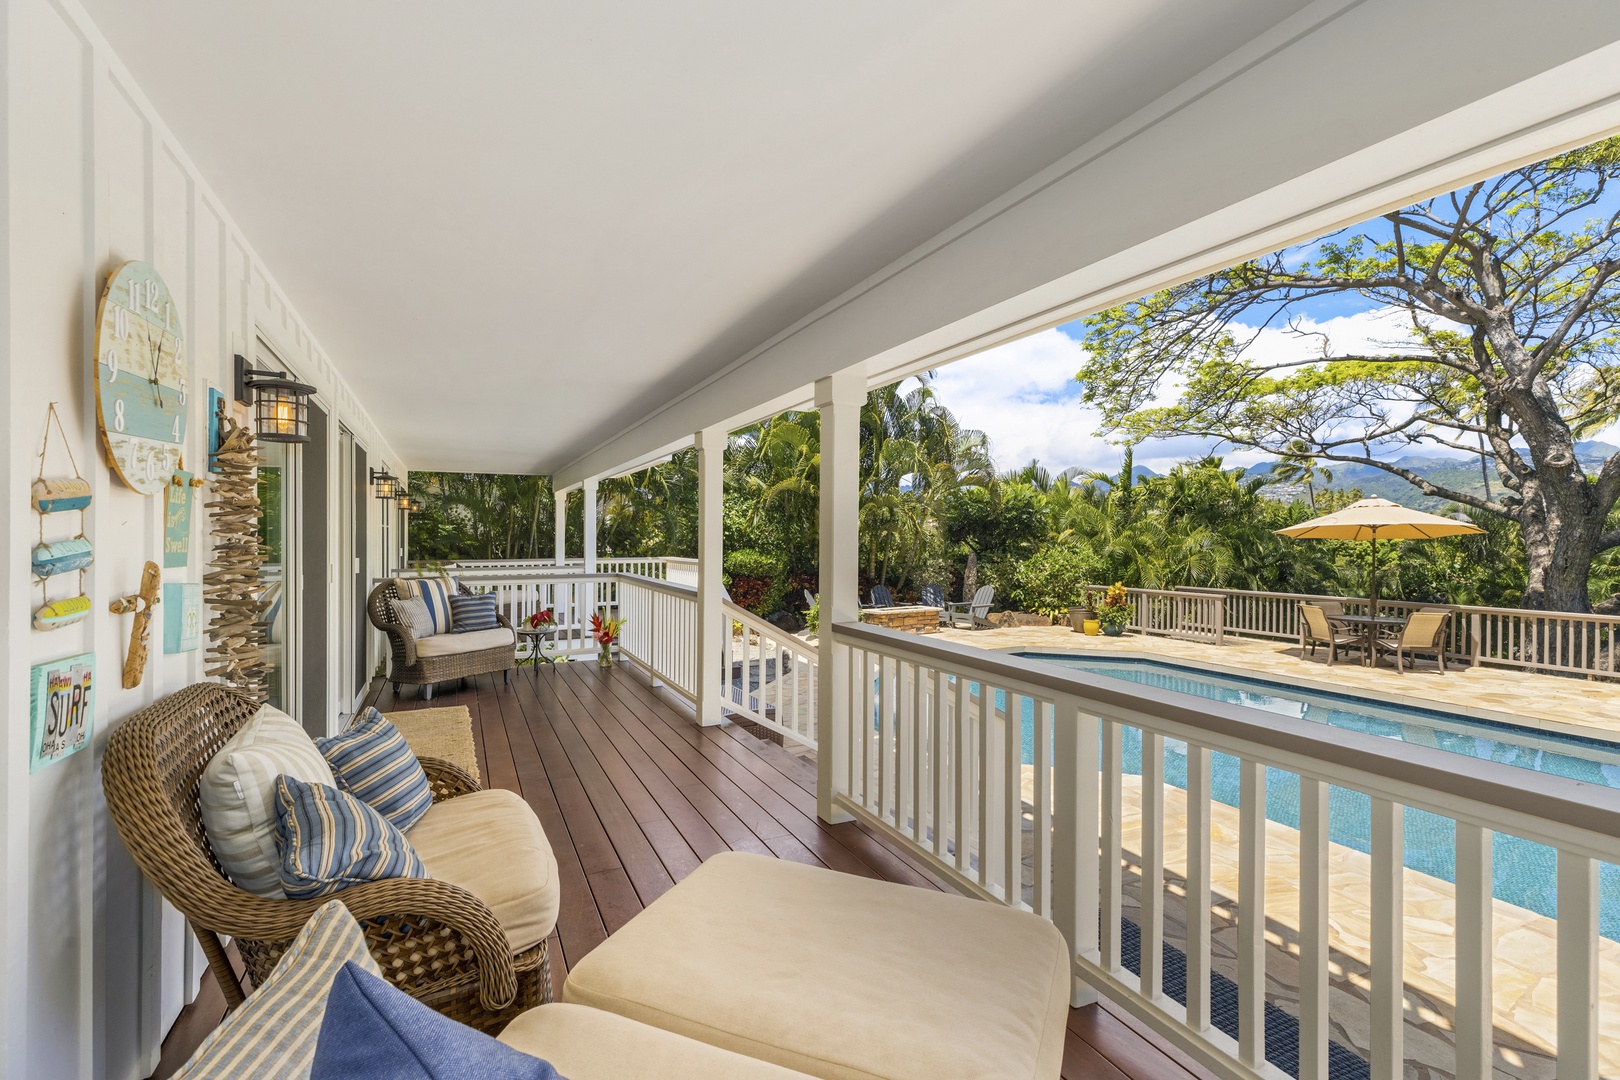 Honolulu Vacation Rentals, Hale Le'ahi - Expansive deck overlooks the private pool, fire pit, and yard